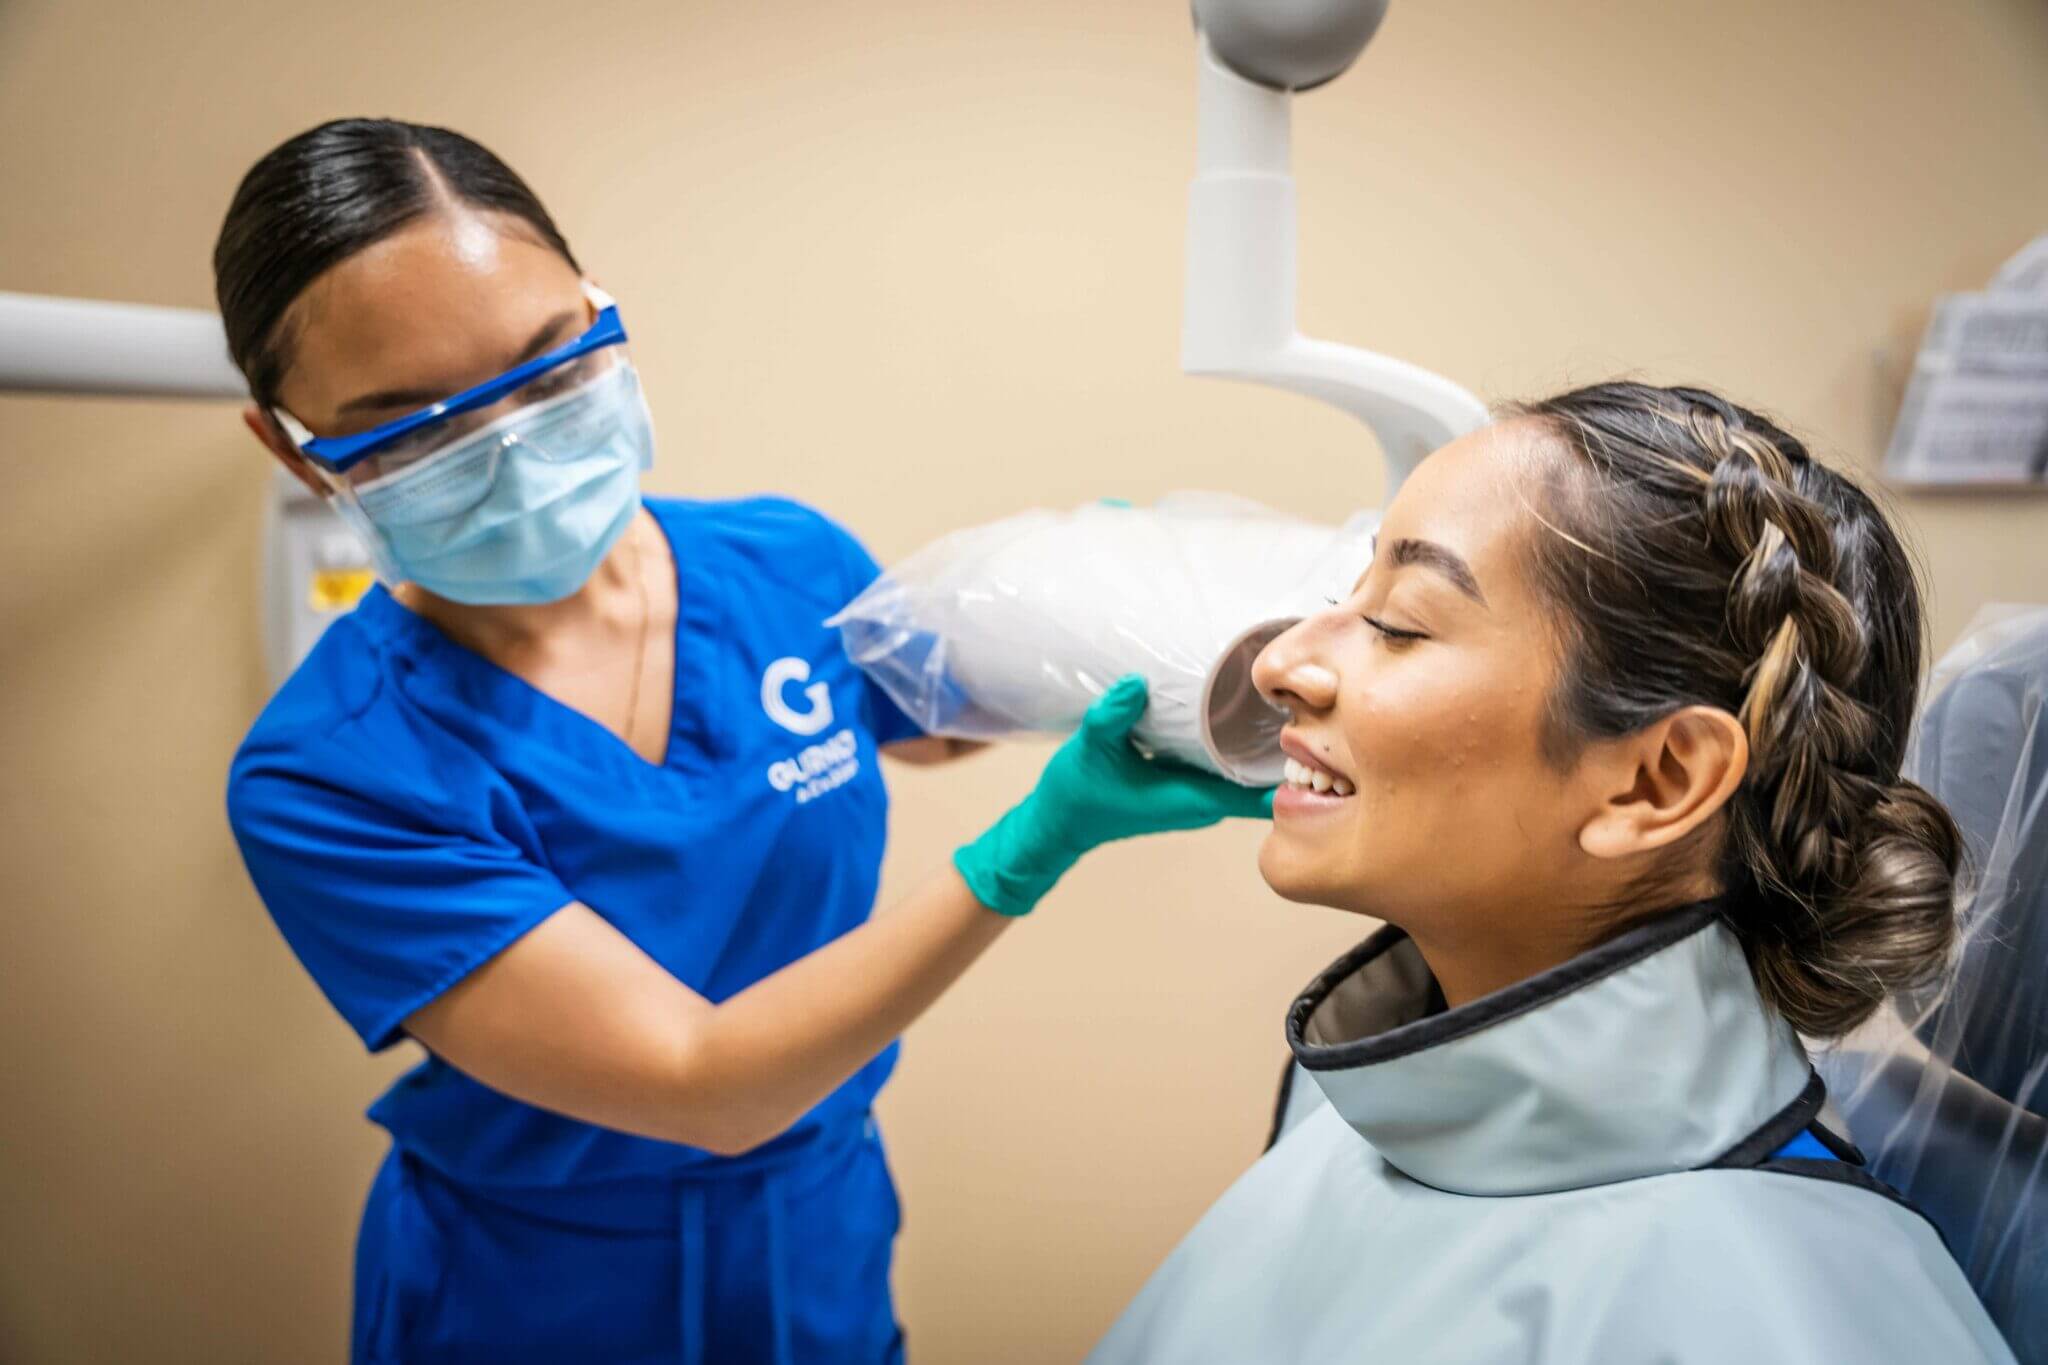 5 Signs You Should be a Dental Assistant - Thriving in a Fast Paced Environment | Gurnick Academy of Medical Arts